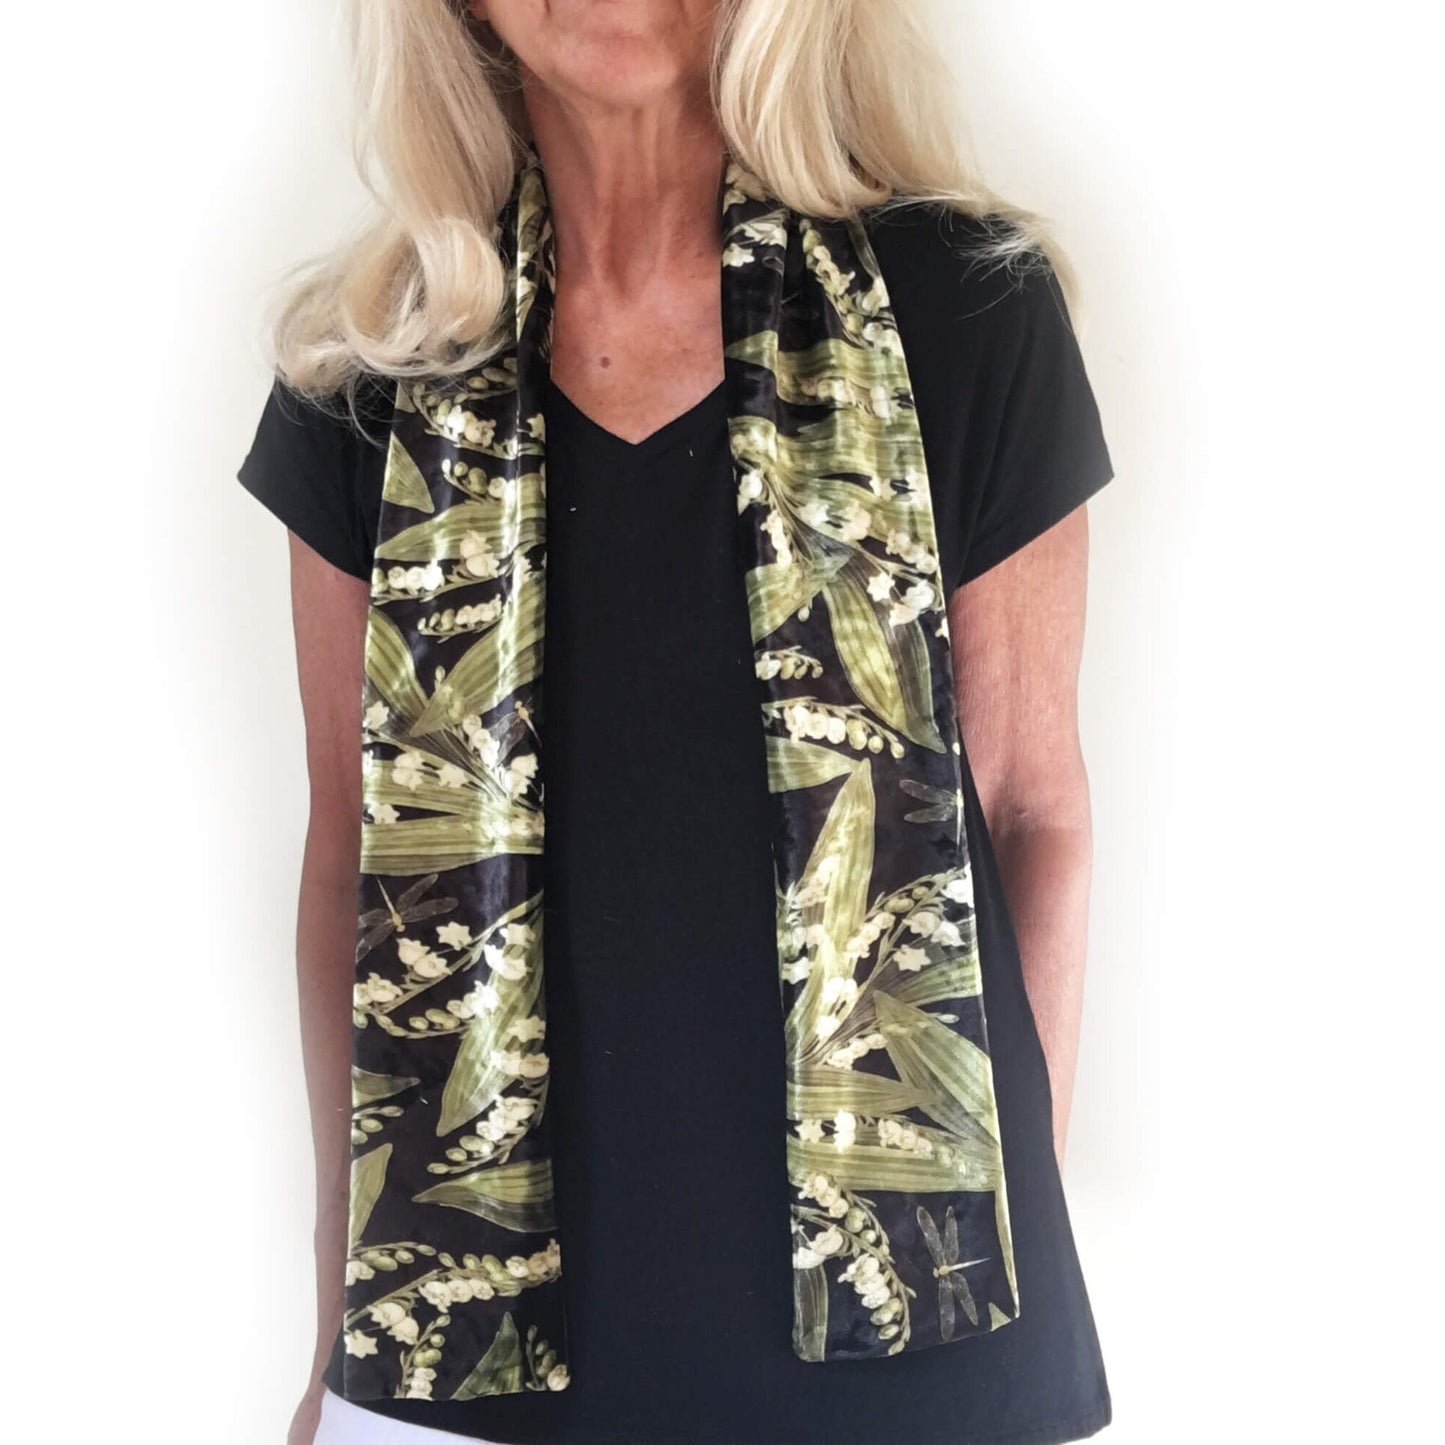 Lily-of-the-Valley Dragonfly Velour Scarf, Womans Scarf, All season, Luminous Scarf, hand painted artist scarf, Wear all day or evening